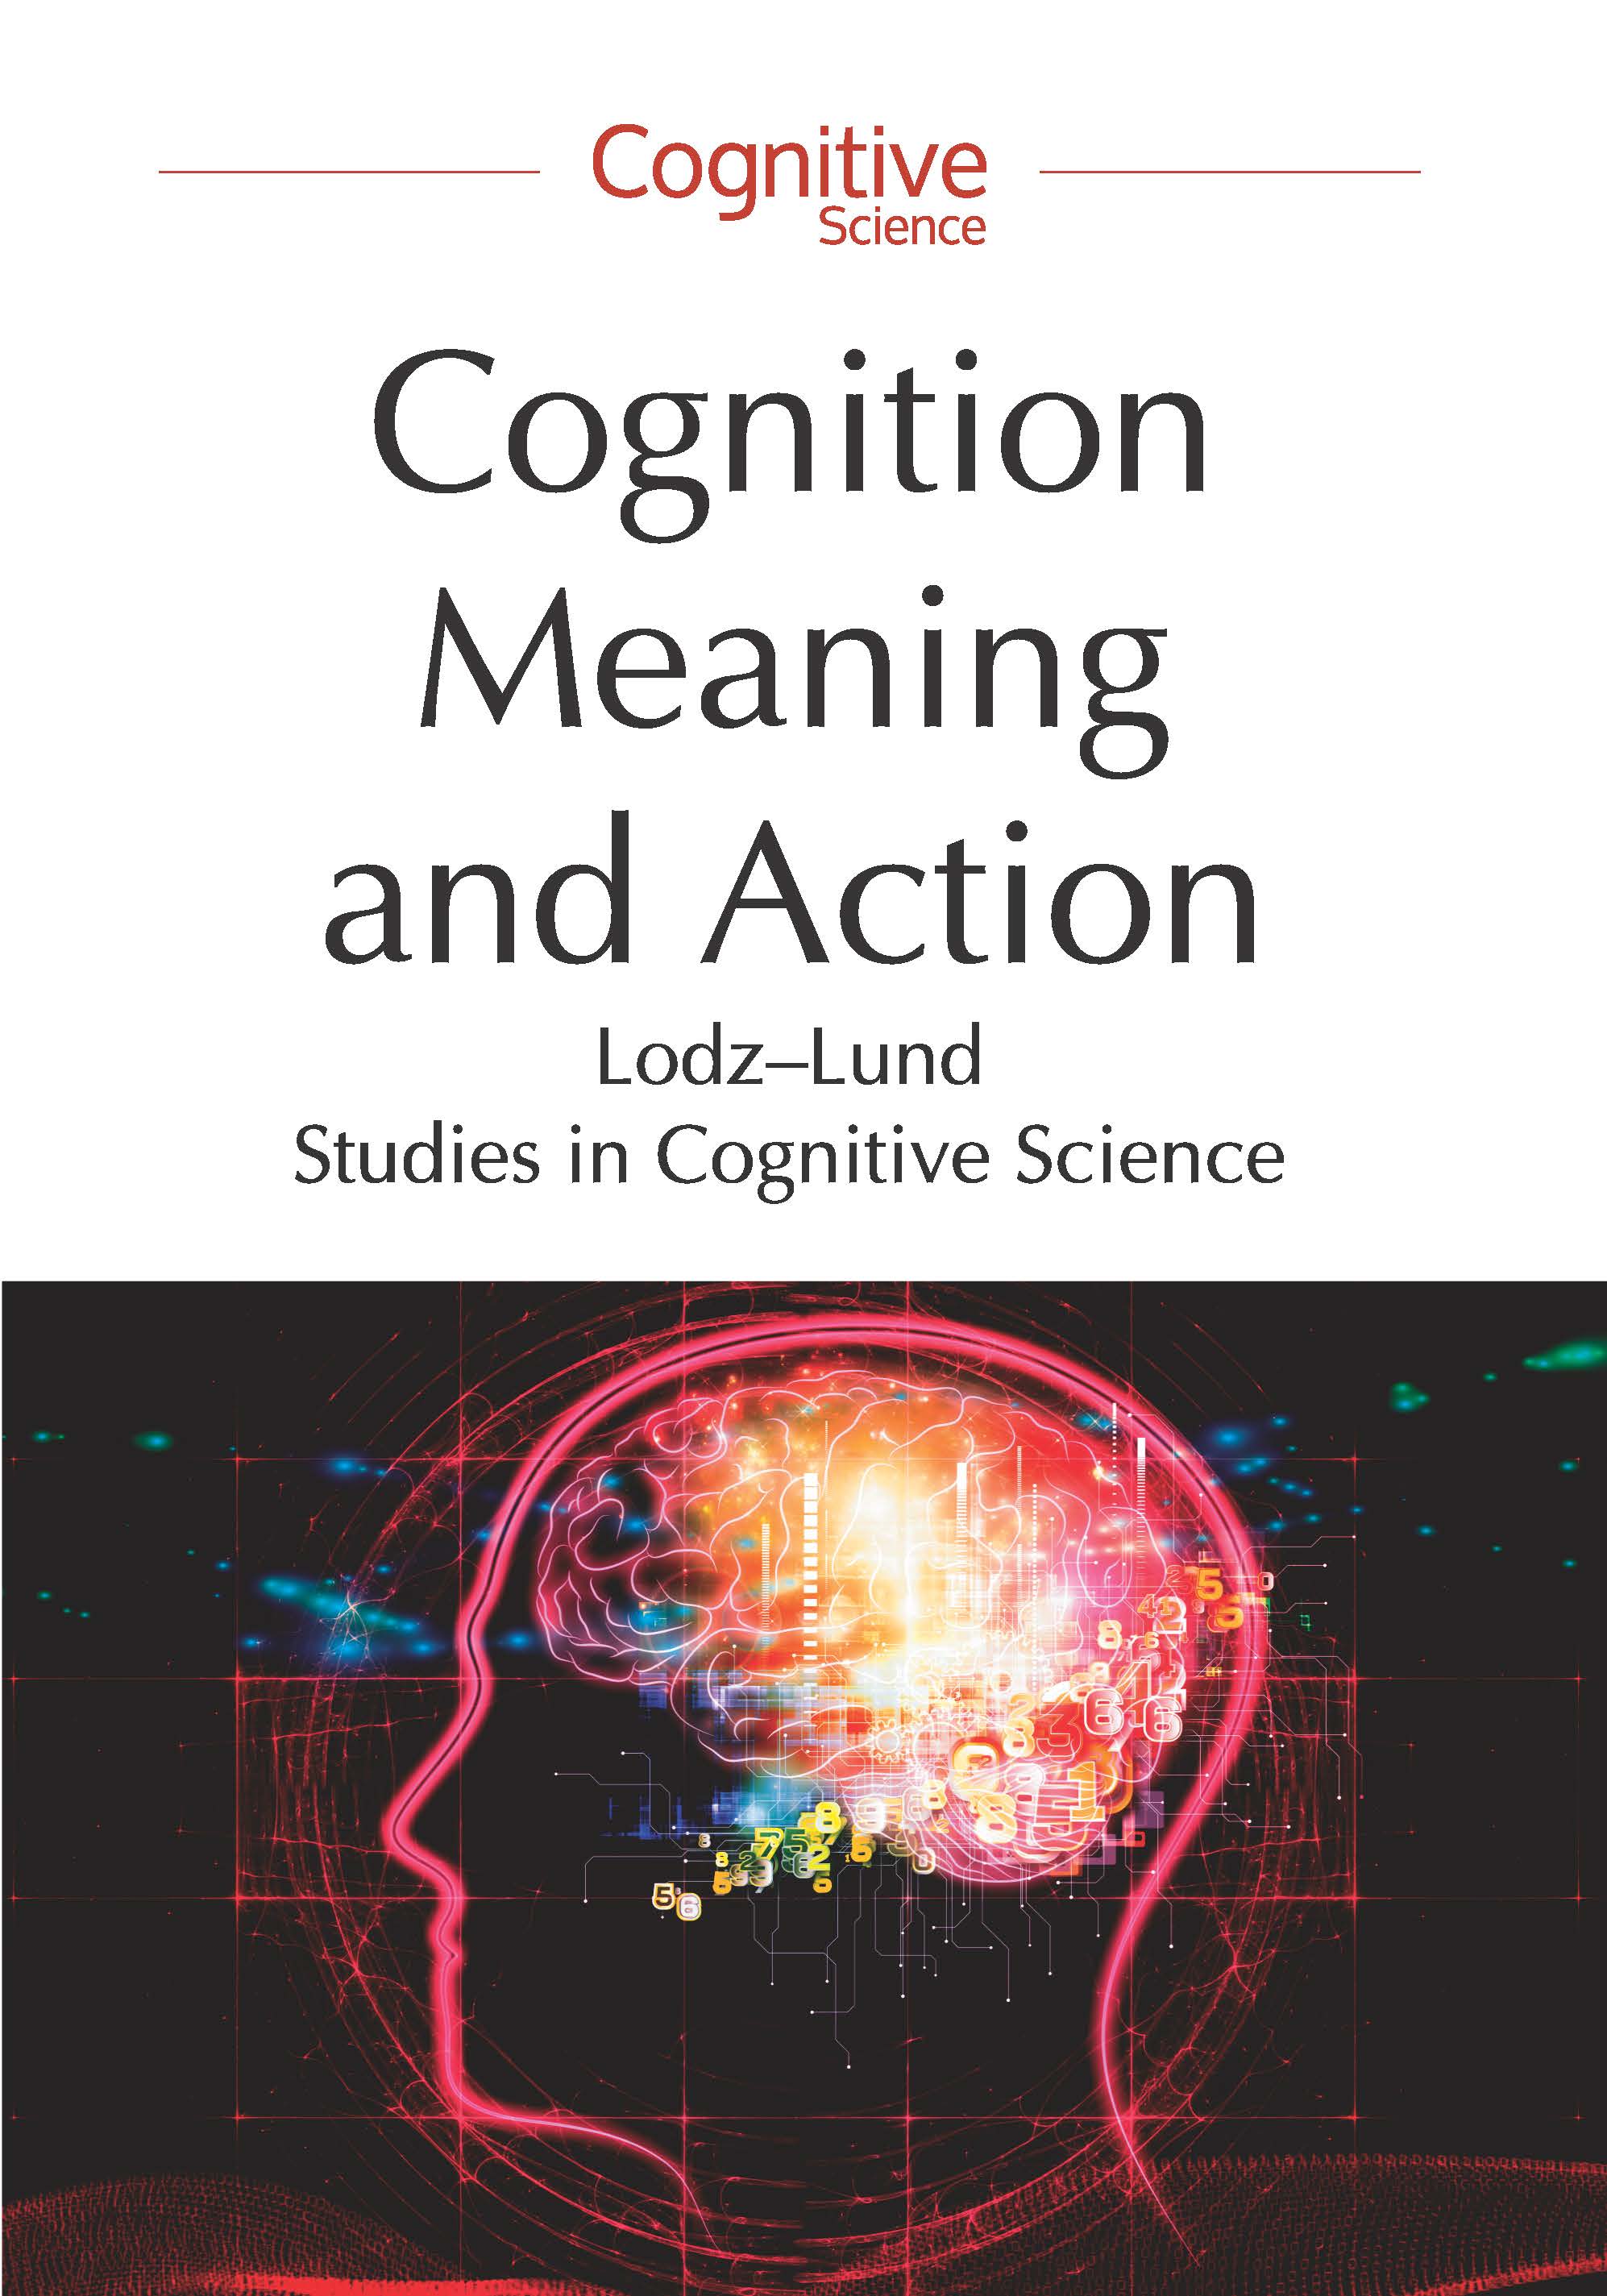  Cognition, Meaning and Action Lodz-Lund Studies in Cognitive Science